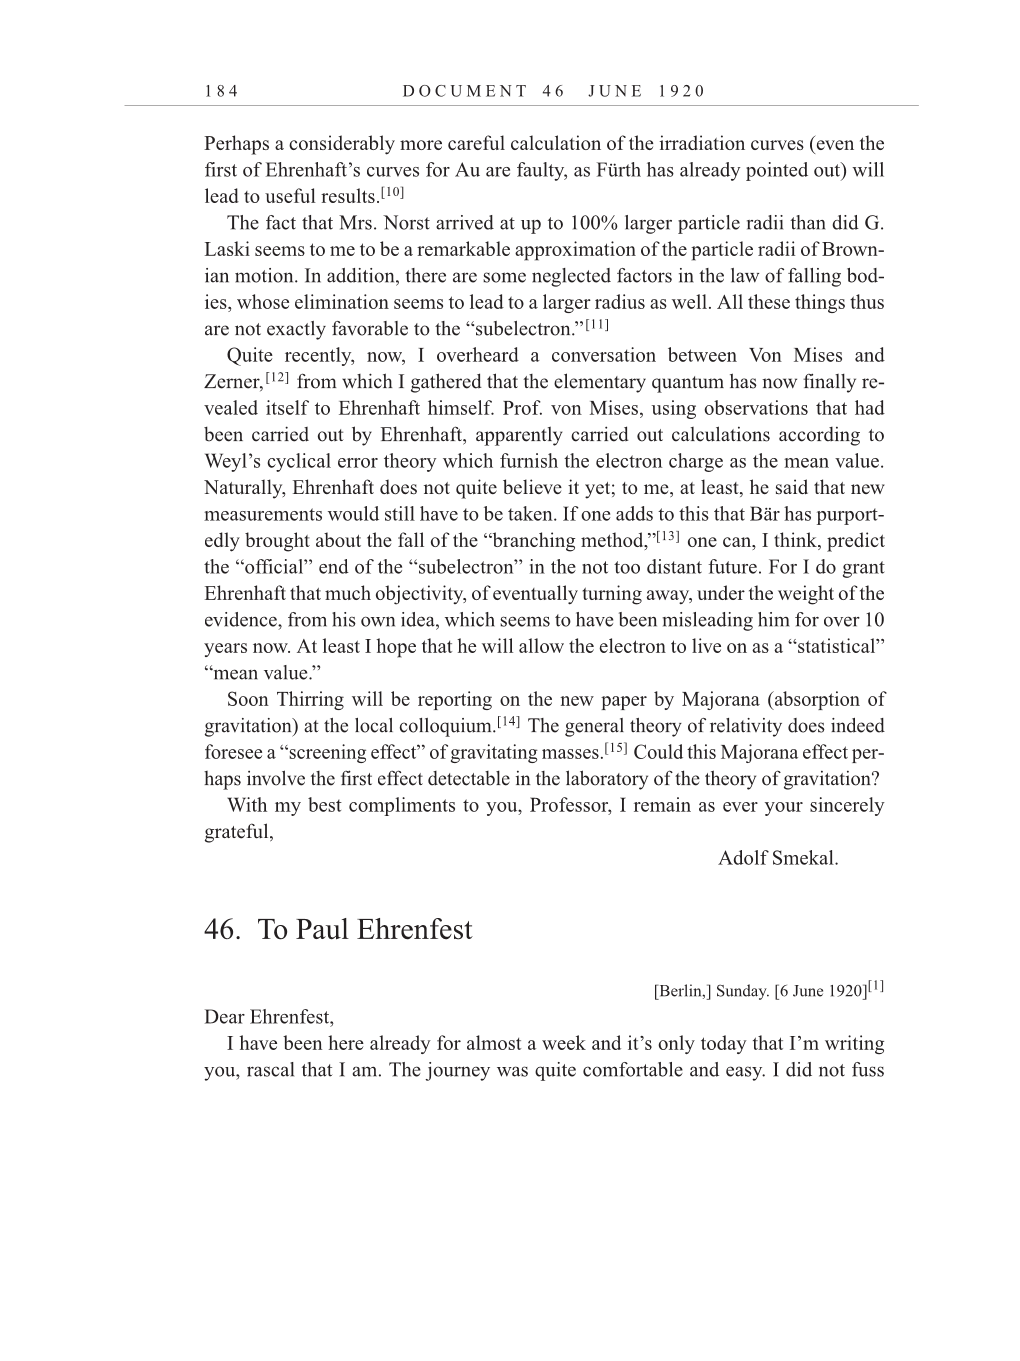 Volume 10: The Berlin Years: Correspondence, May-December 1920, and Supplementary Correspondence, 1909-1920 (English translation supplement) page 184